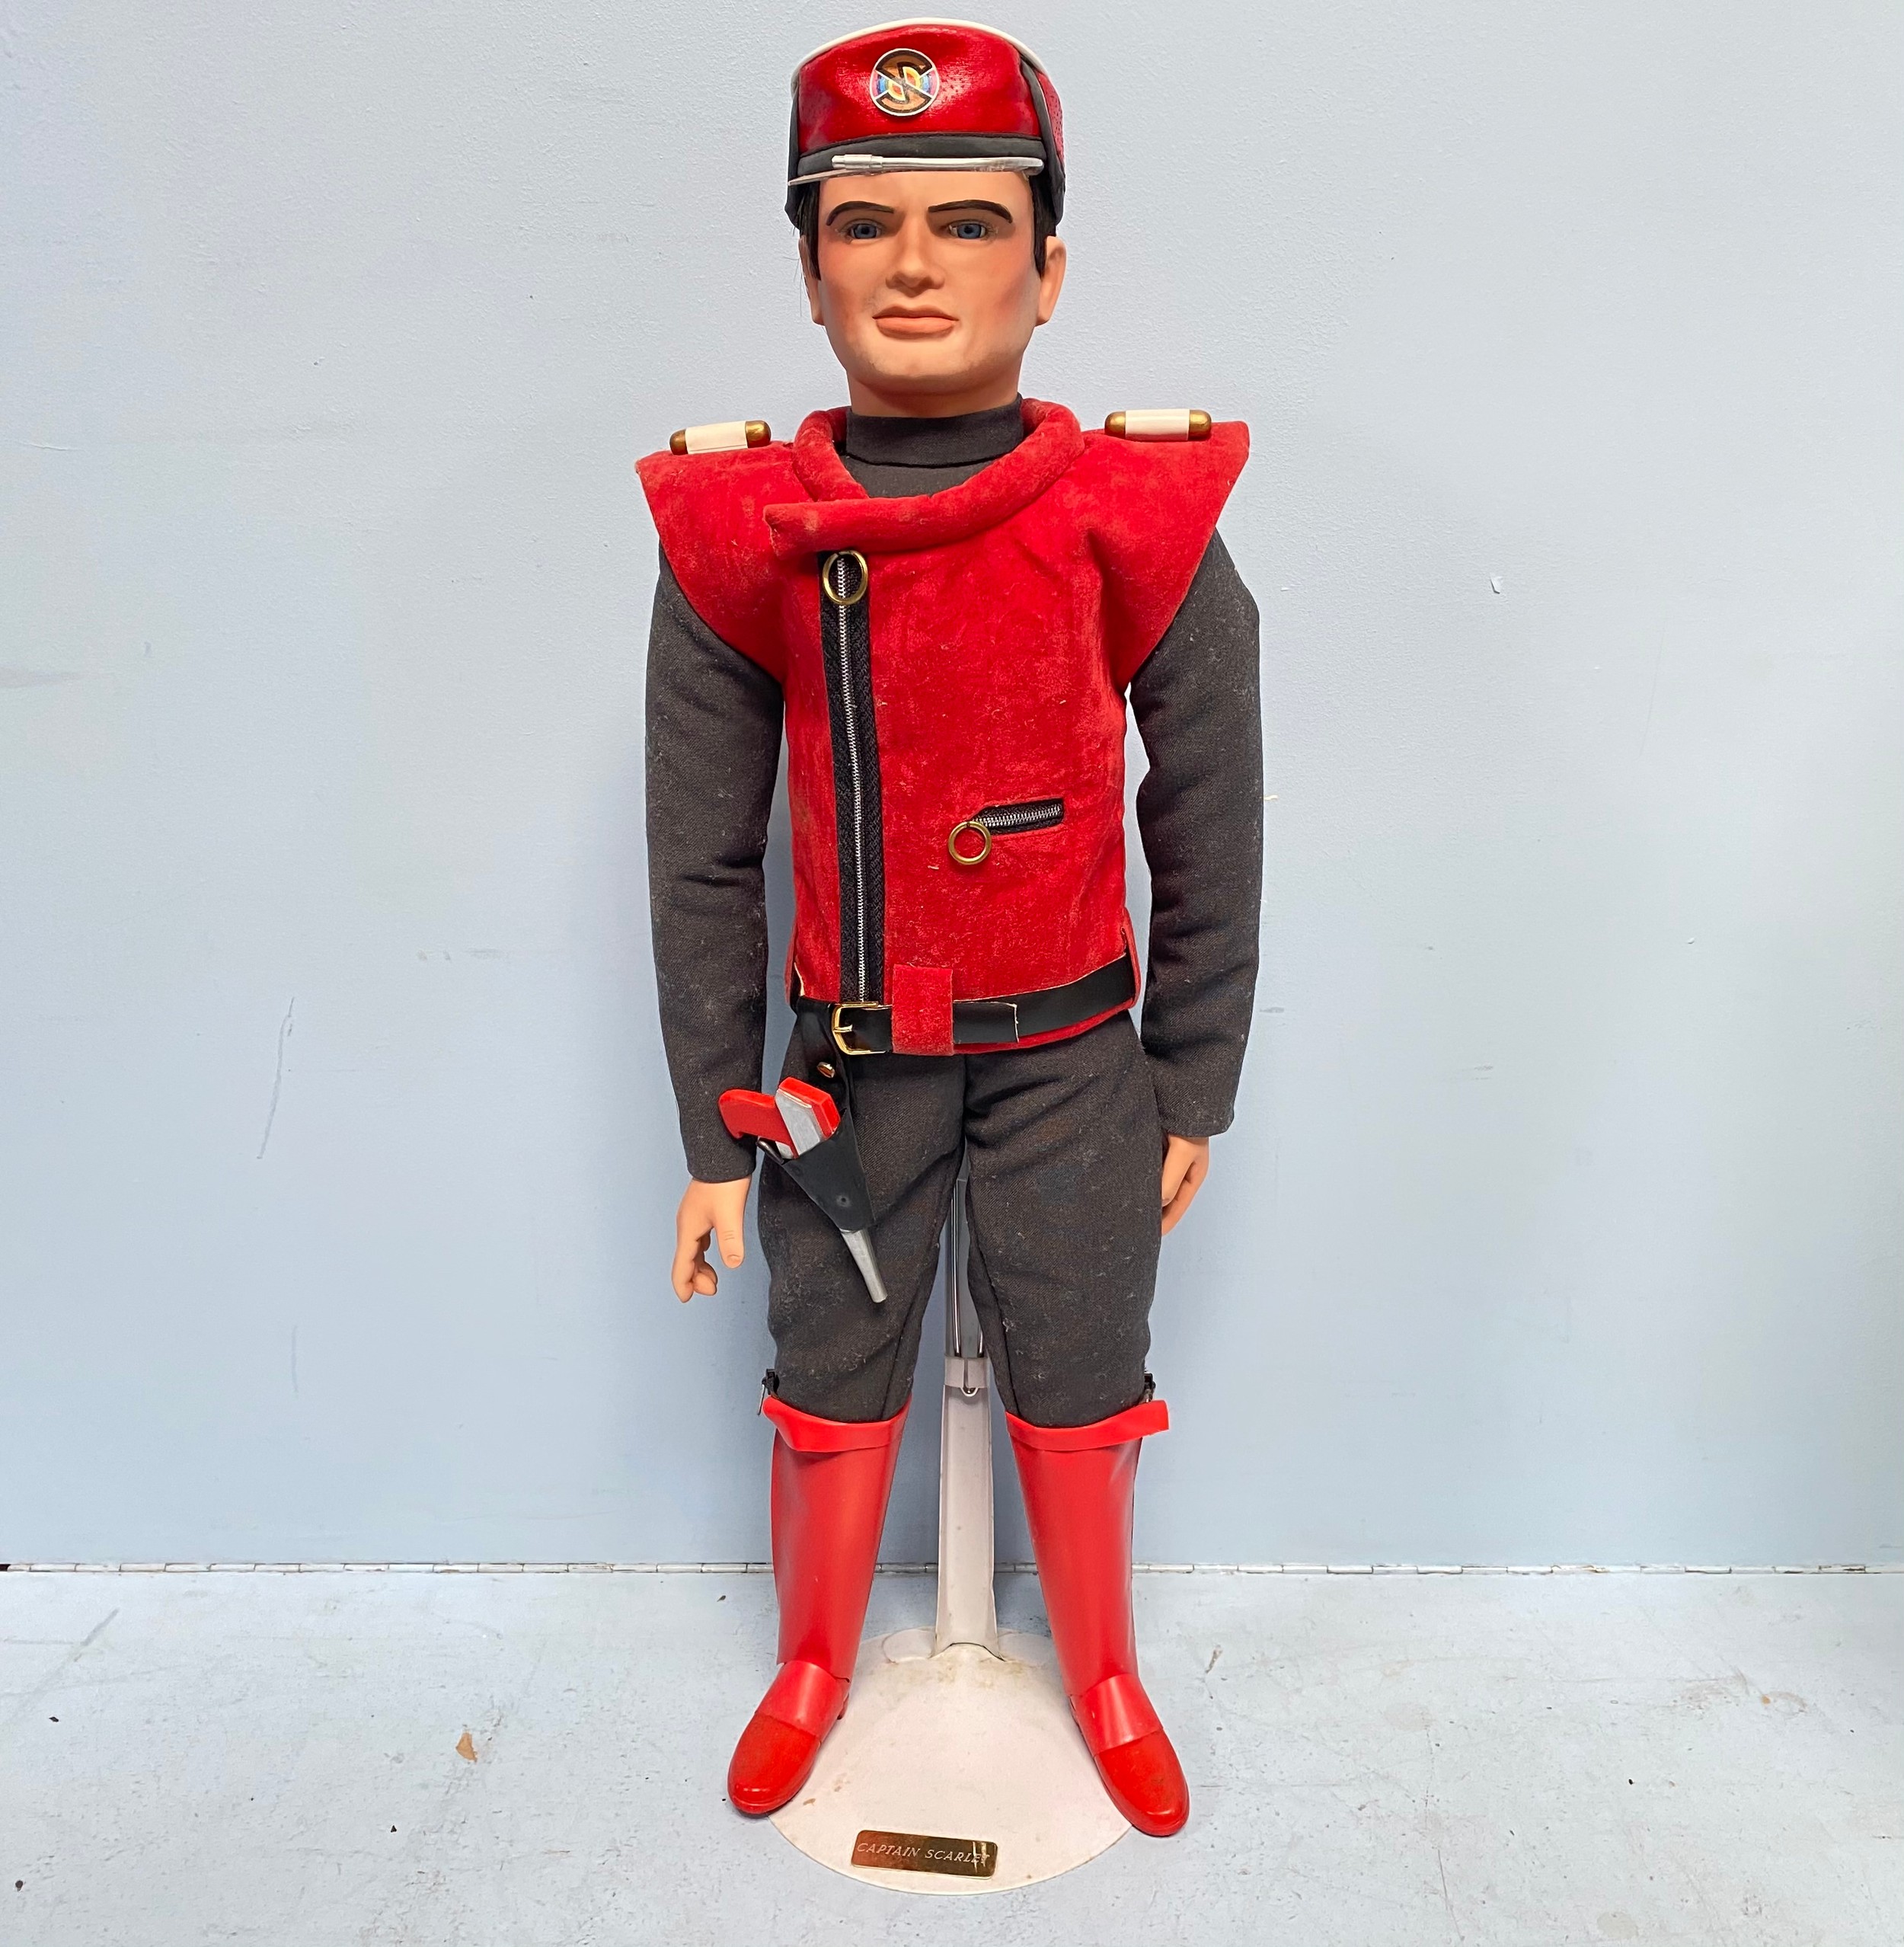 A Thunderbirds individually hand crafted model figure of Captain Scarlet with posable arms, by